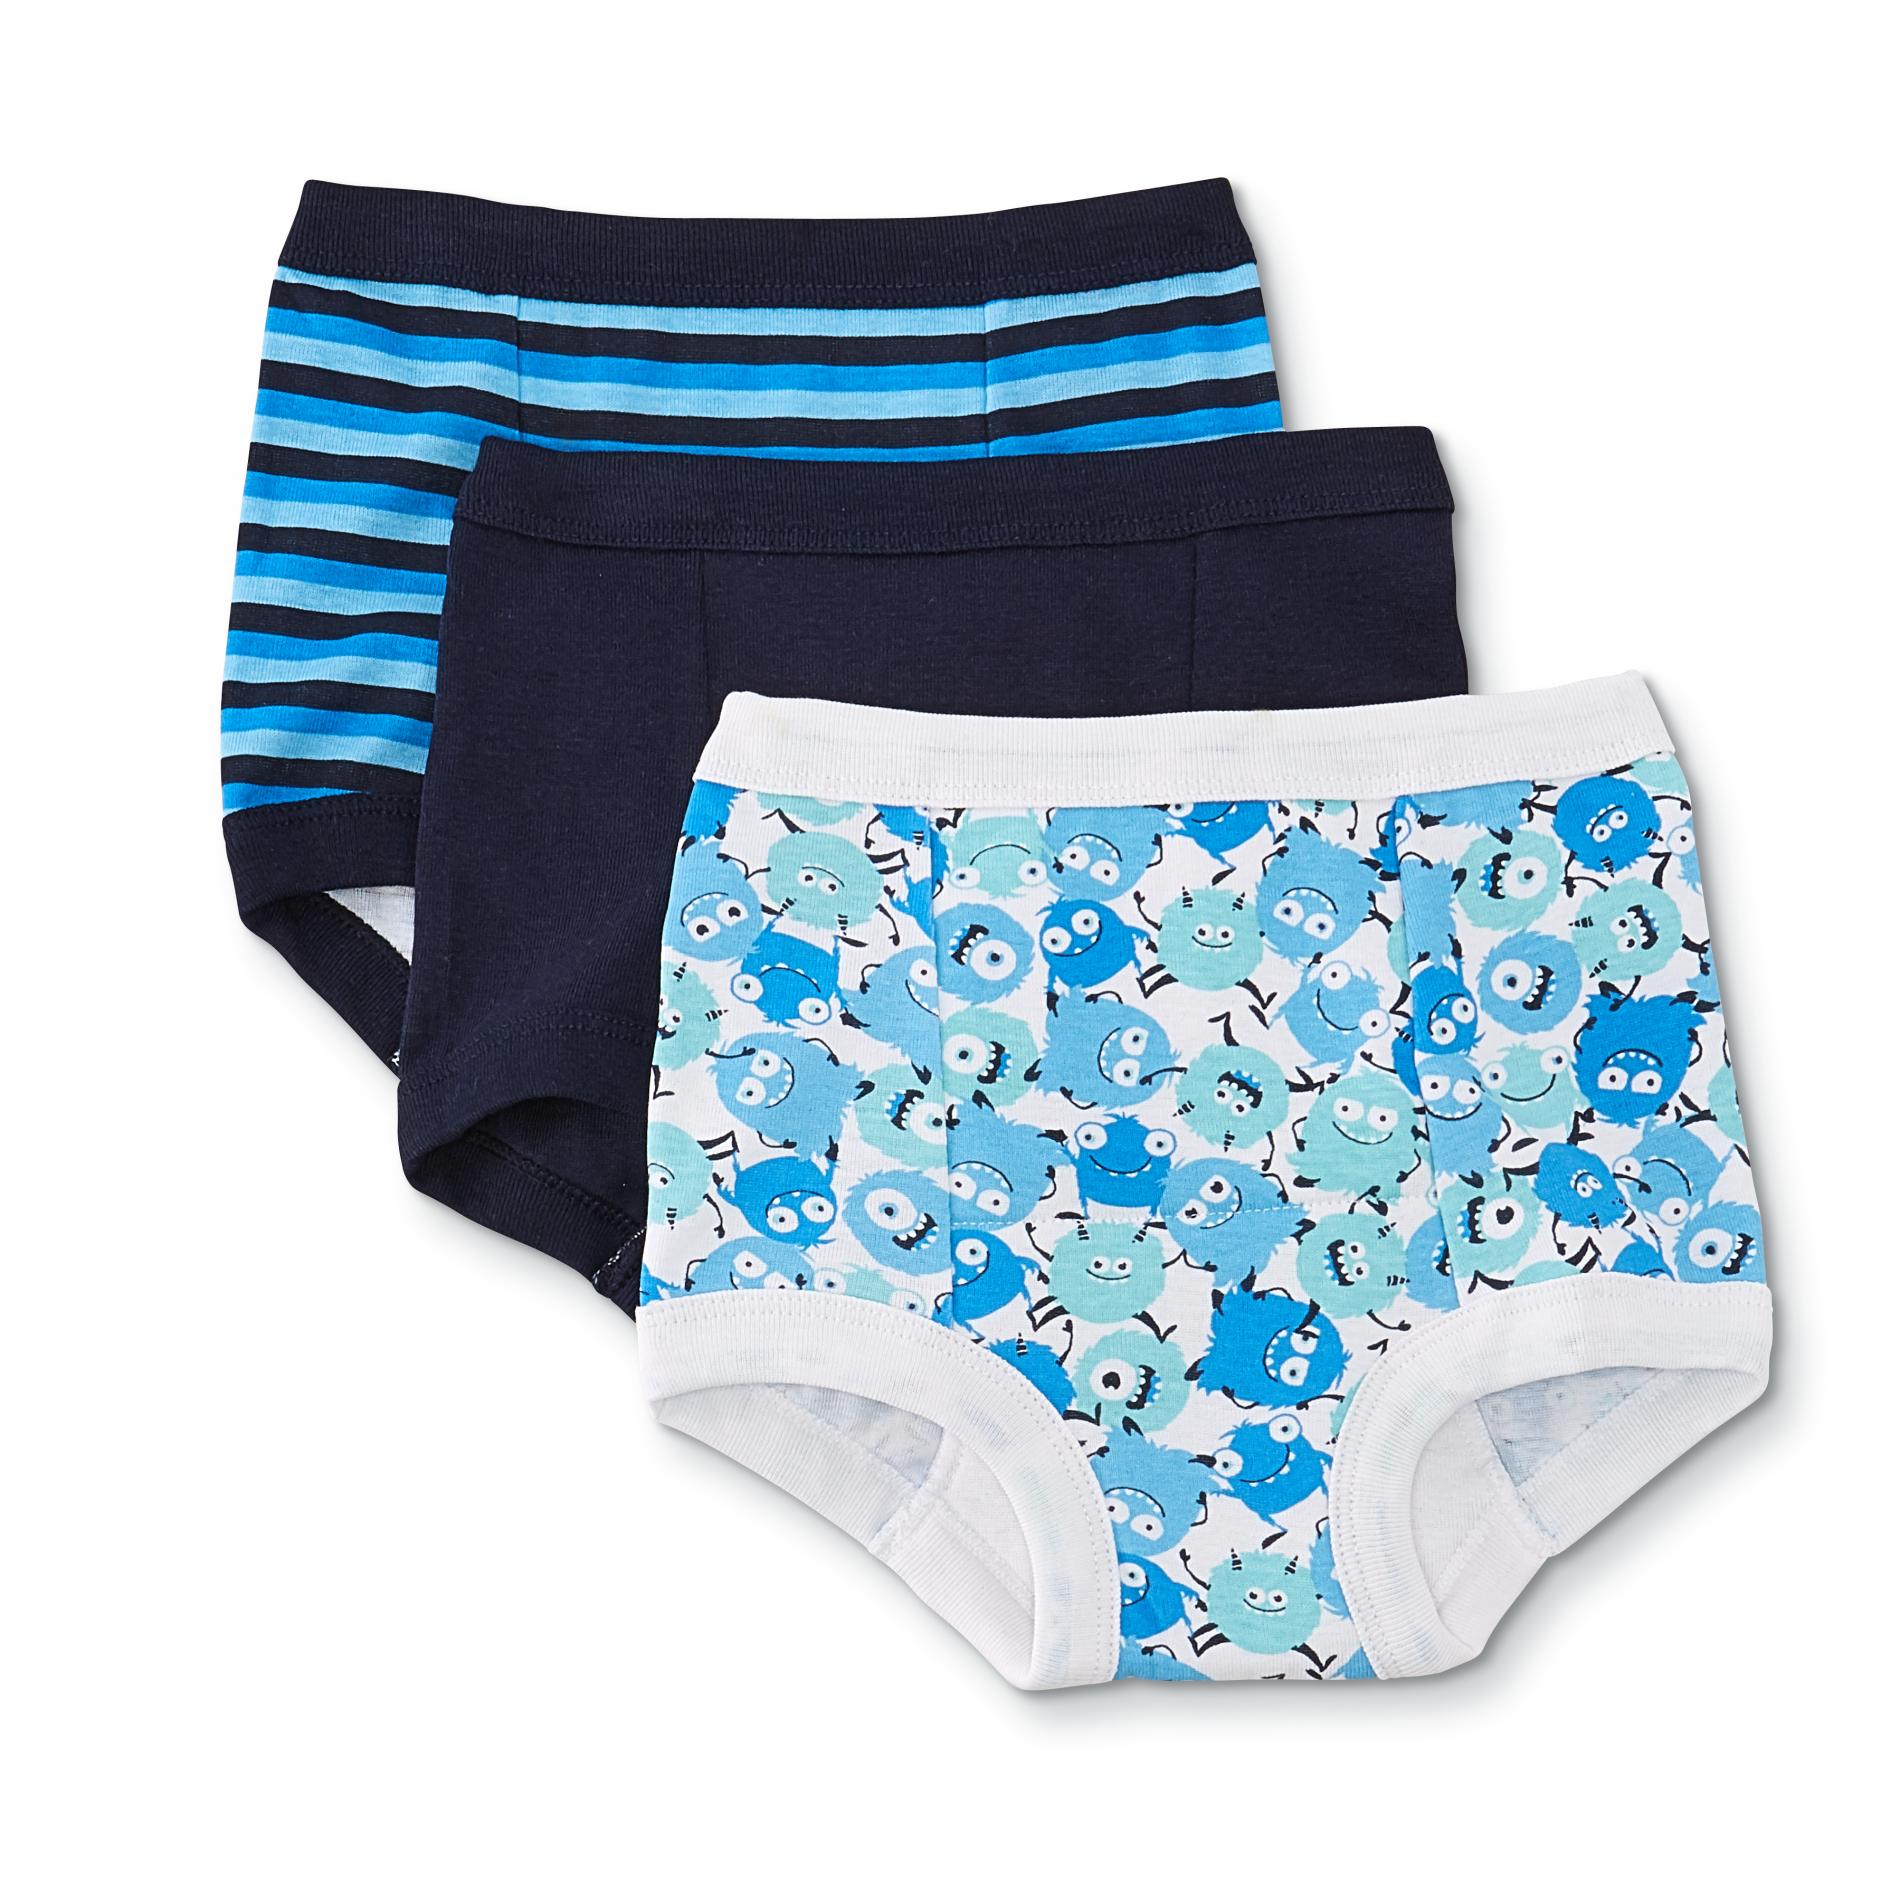 Simply Styled Toddler Boys' 3-Pack Training Pants - Mixed Print